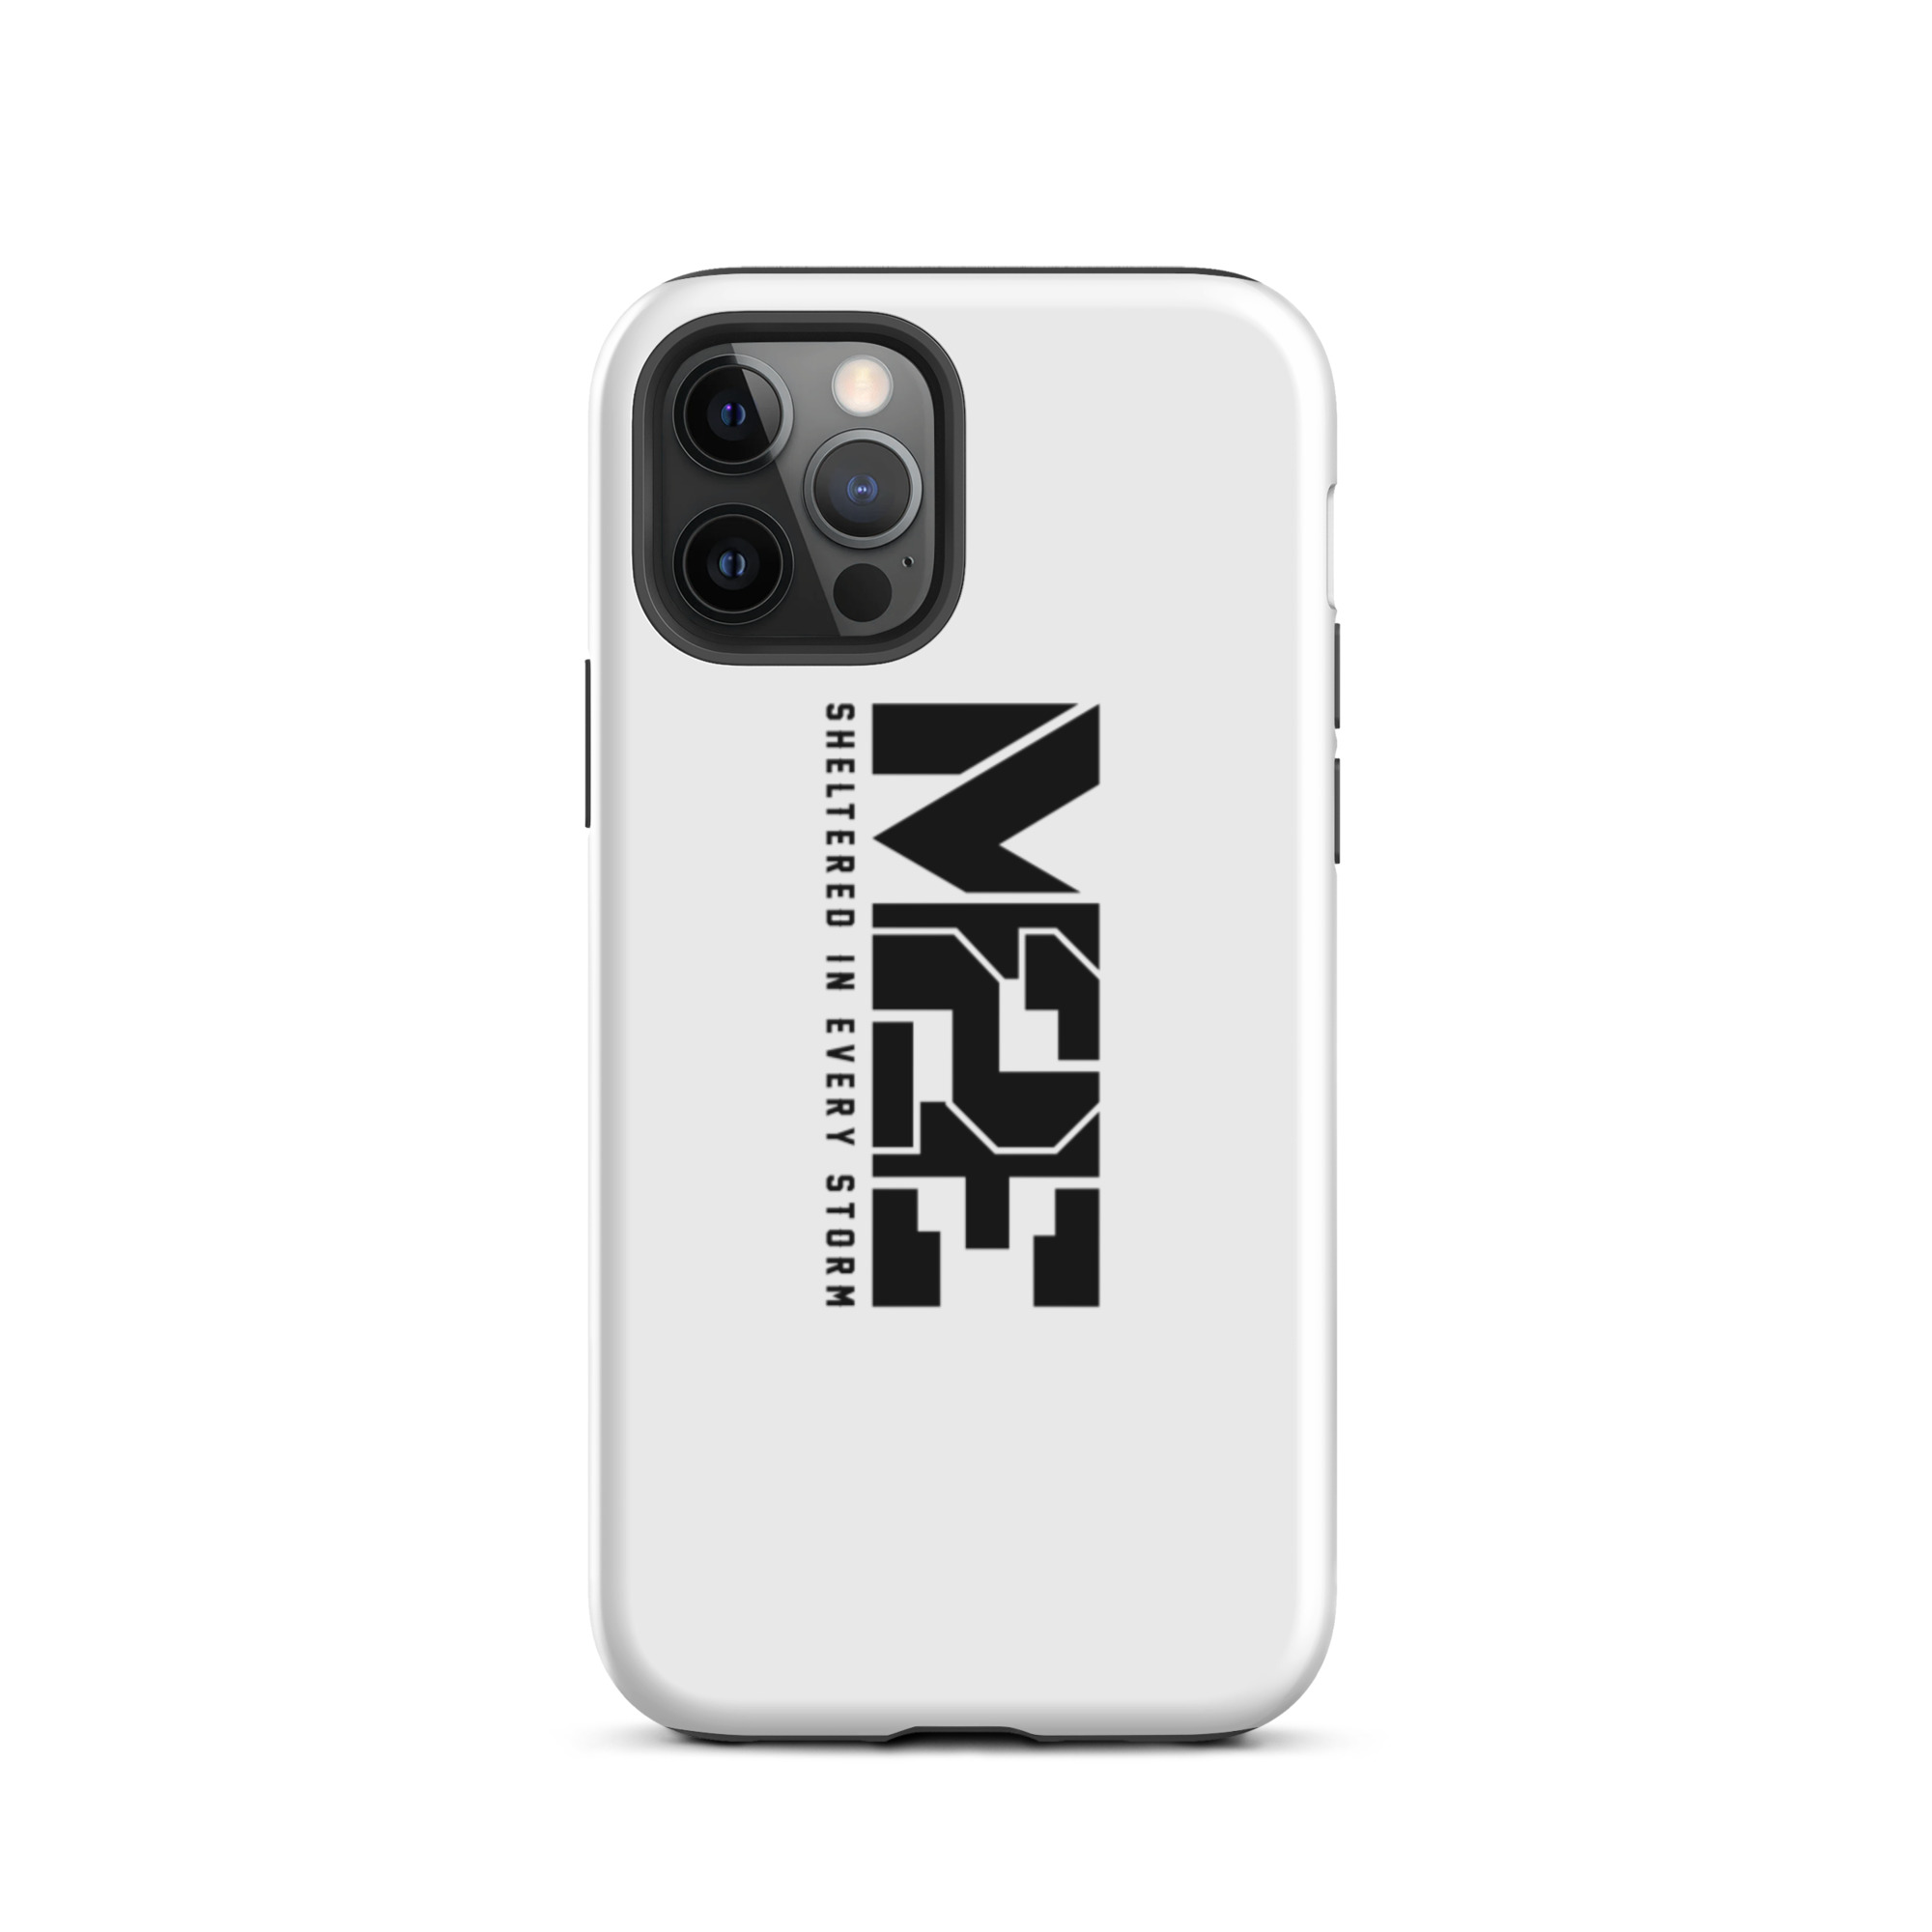 tough-iphone-case-glossy-iphone-12-pro-front-631e6f751cce1.jpg